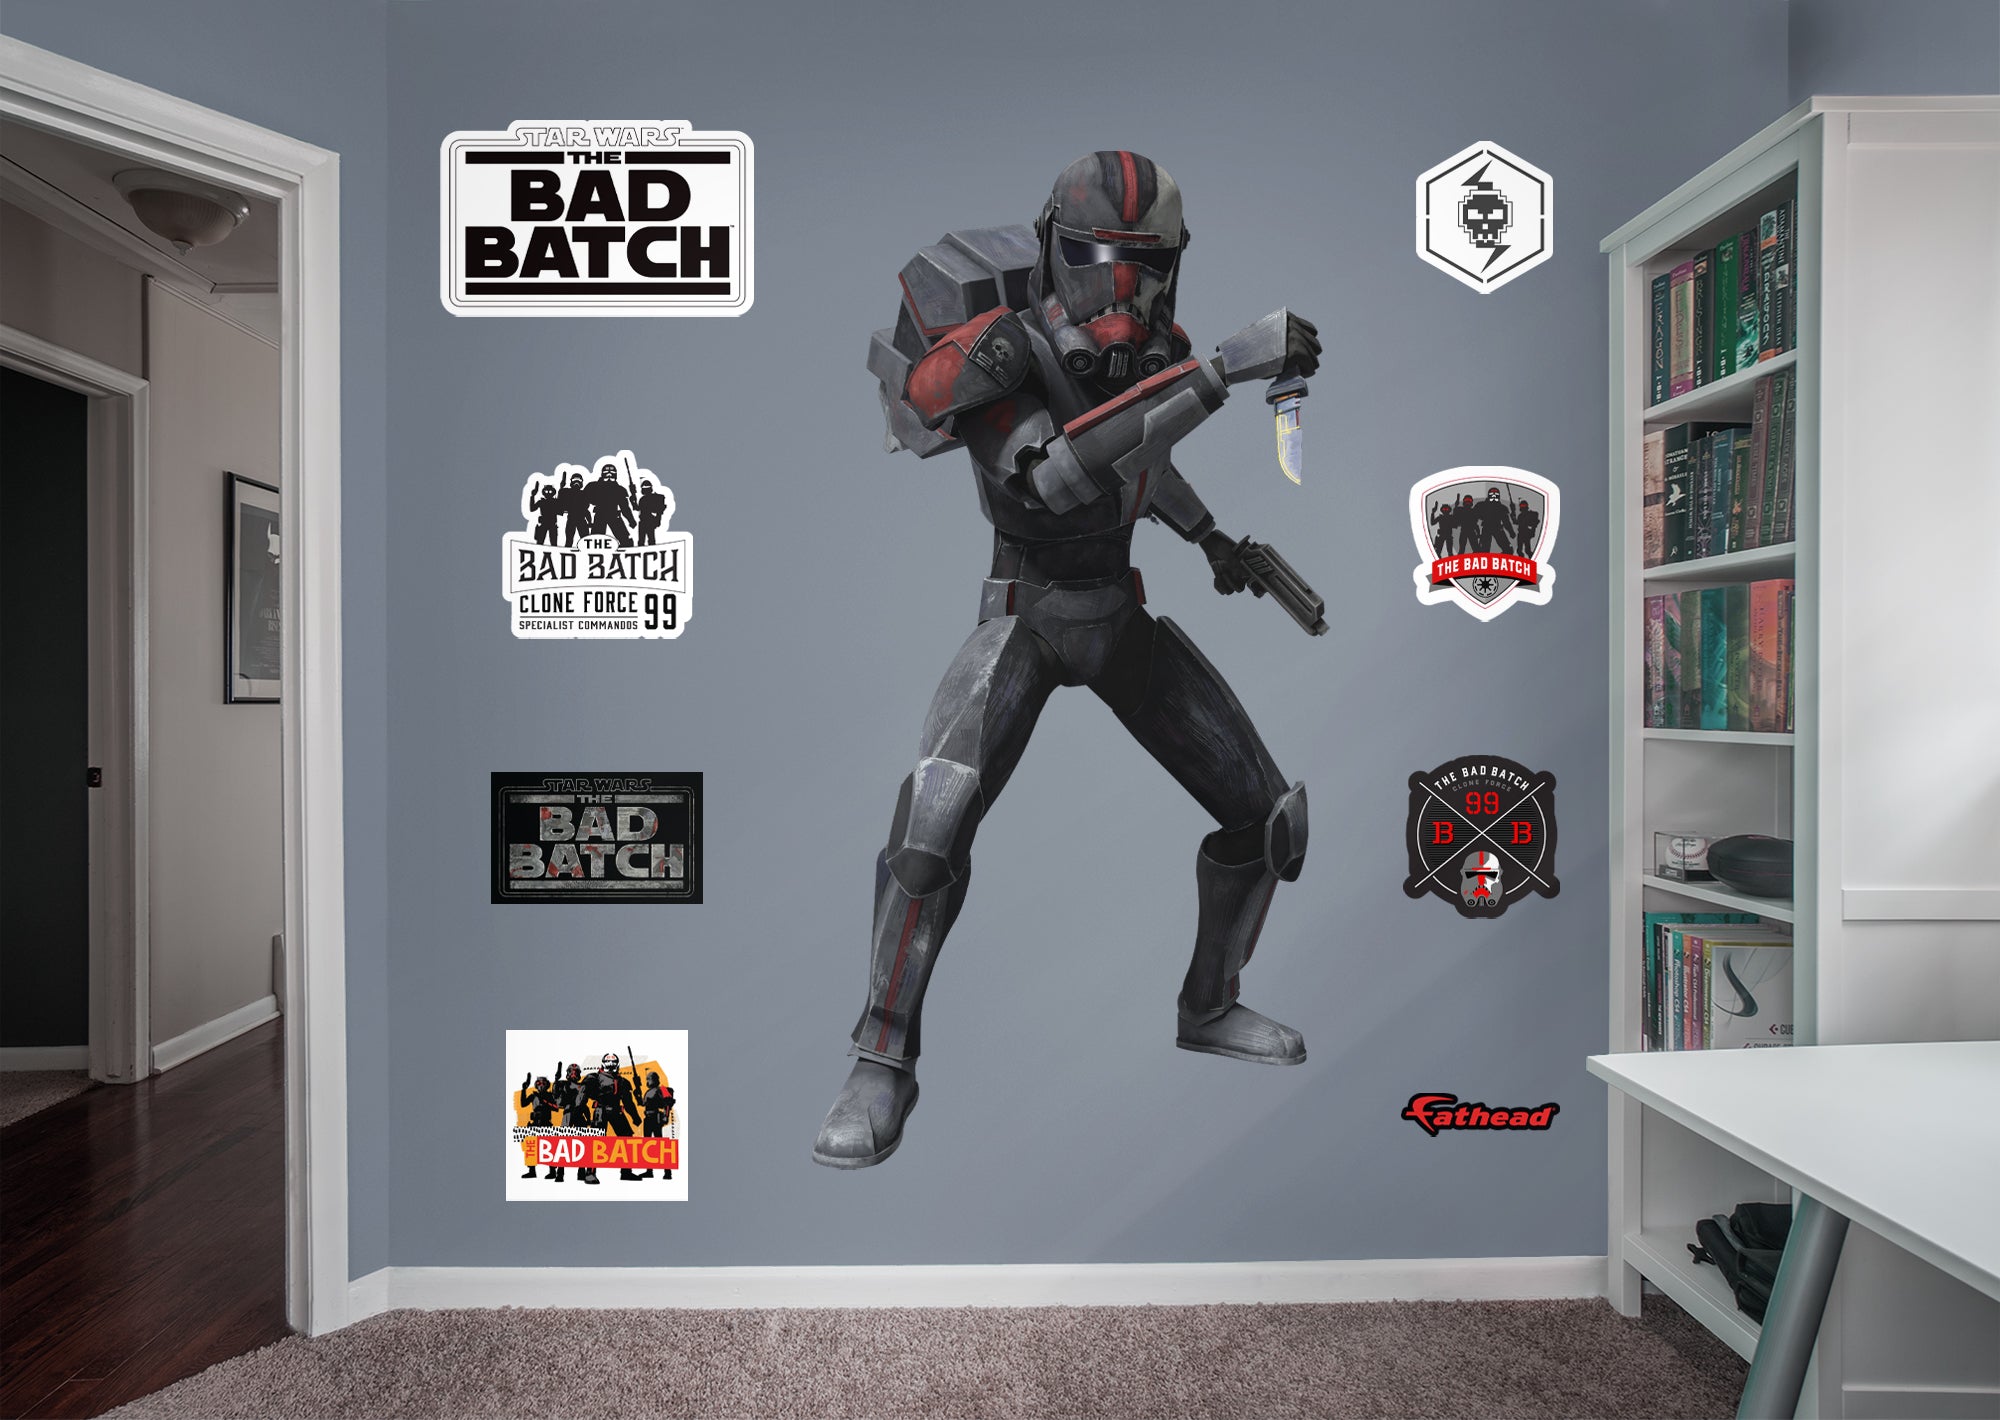 Bad Batch Hunter - Officially Licensed Star Wars Removable Wall Decal Life-Size Character + 8 Decals by Fathead | Vinyl